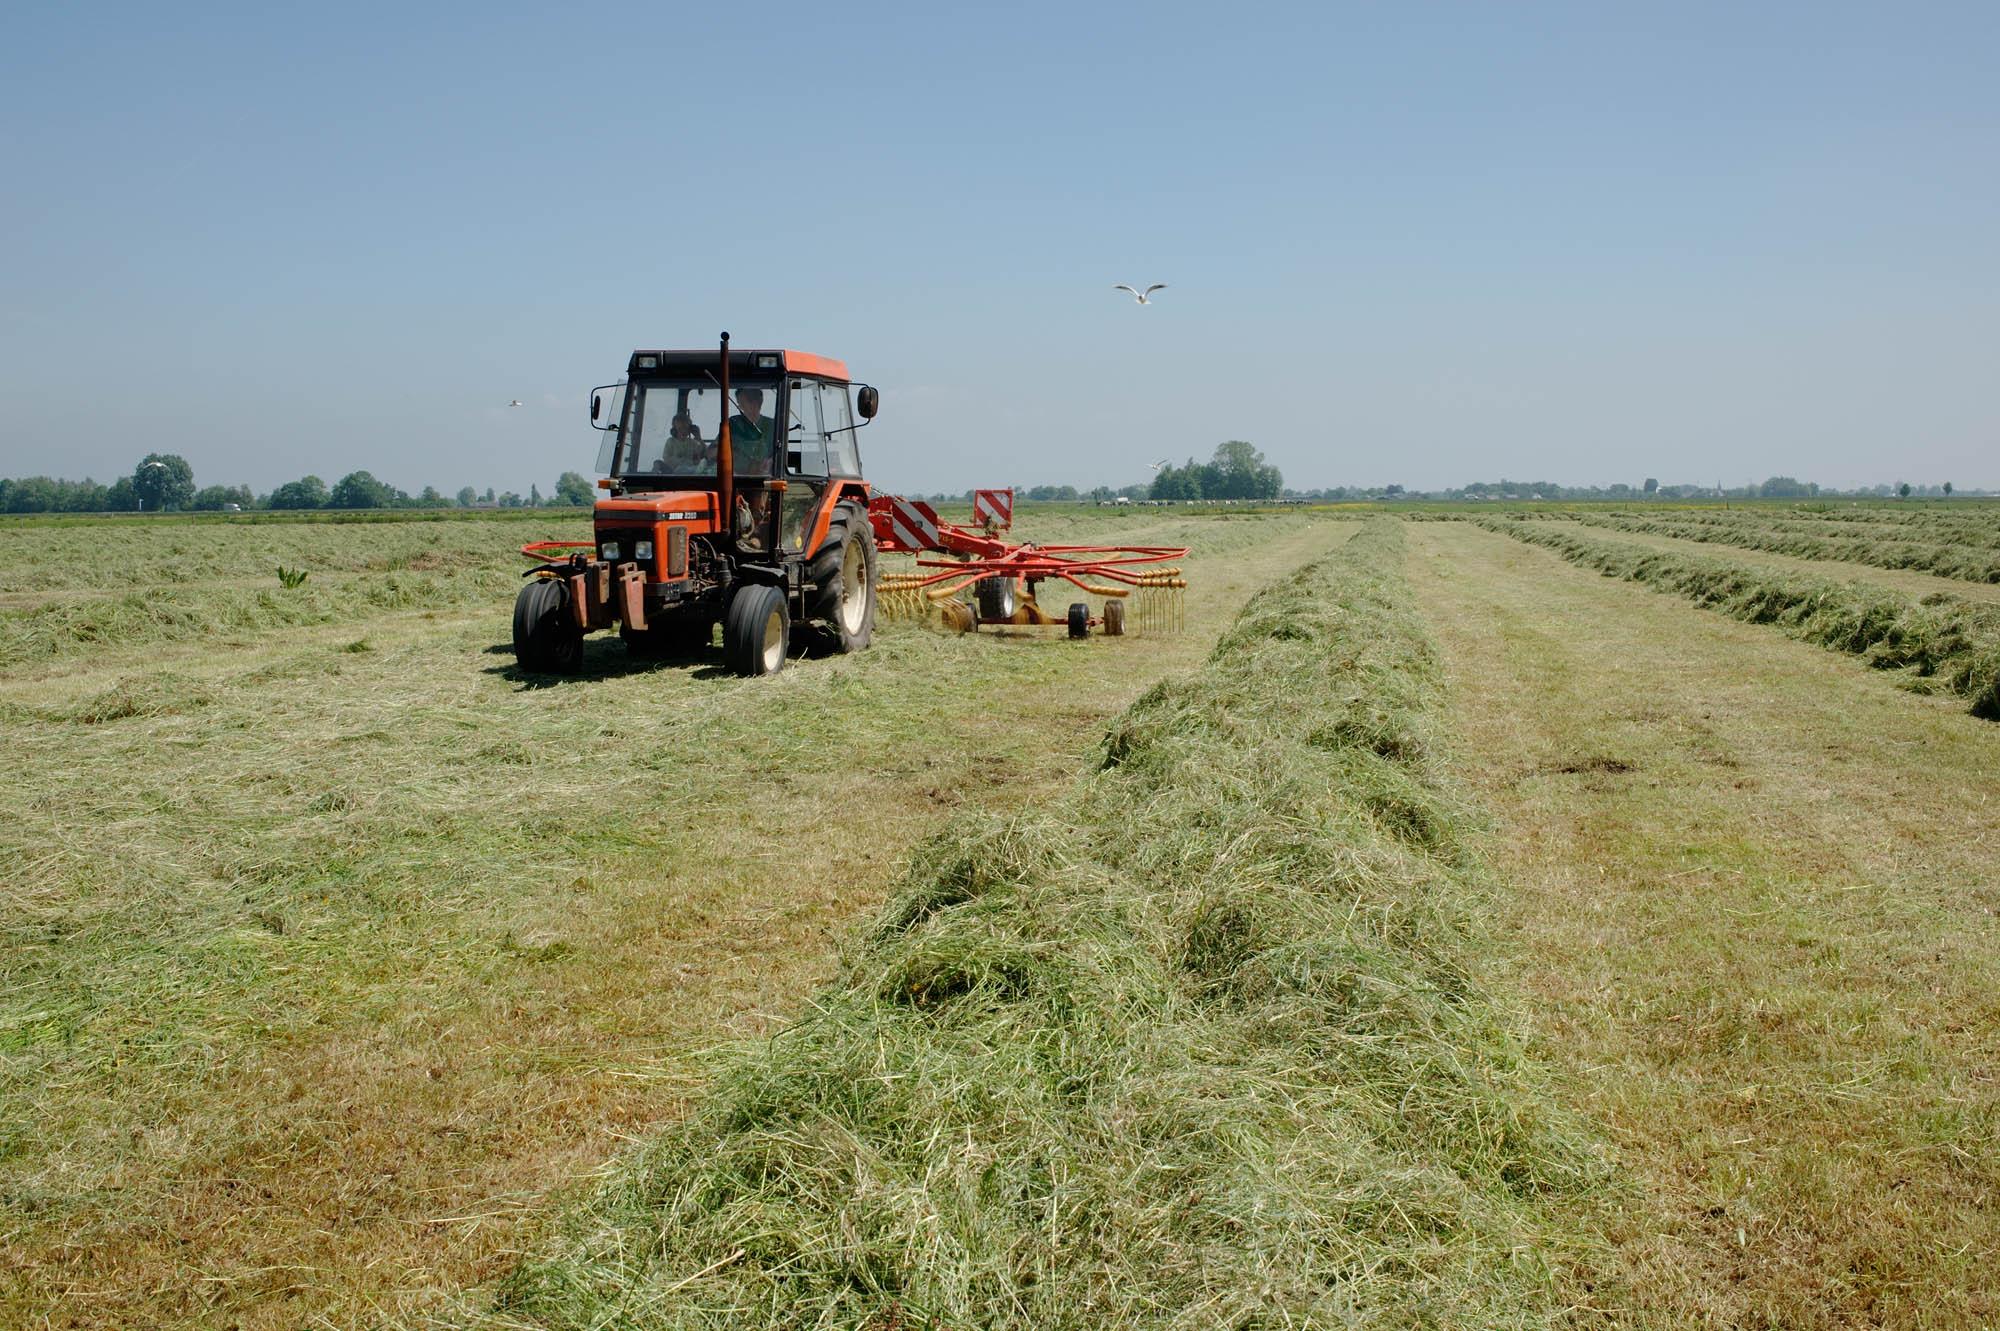 The Other Farm - Koos and his son Timo are raking grass with a rotary rake...